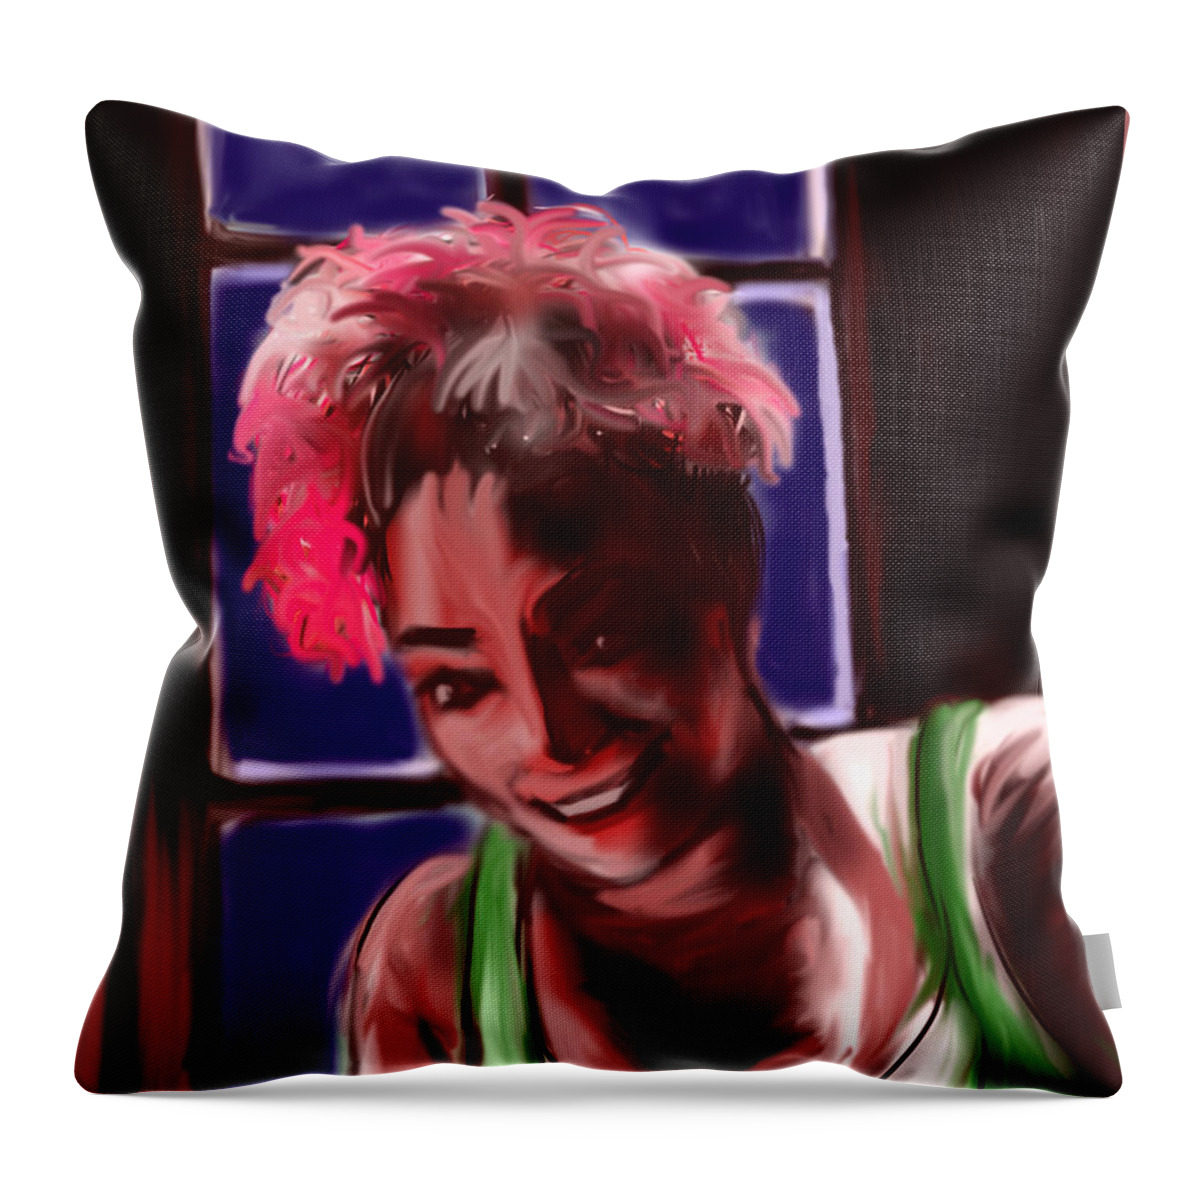 Portrait Throw Pillow featuring the painting Redhead by Jean Pacheco Ravinski